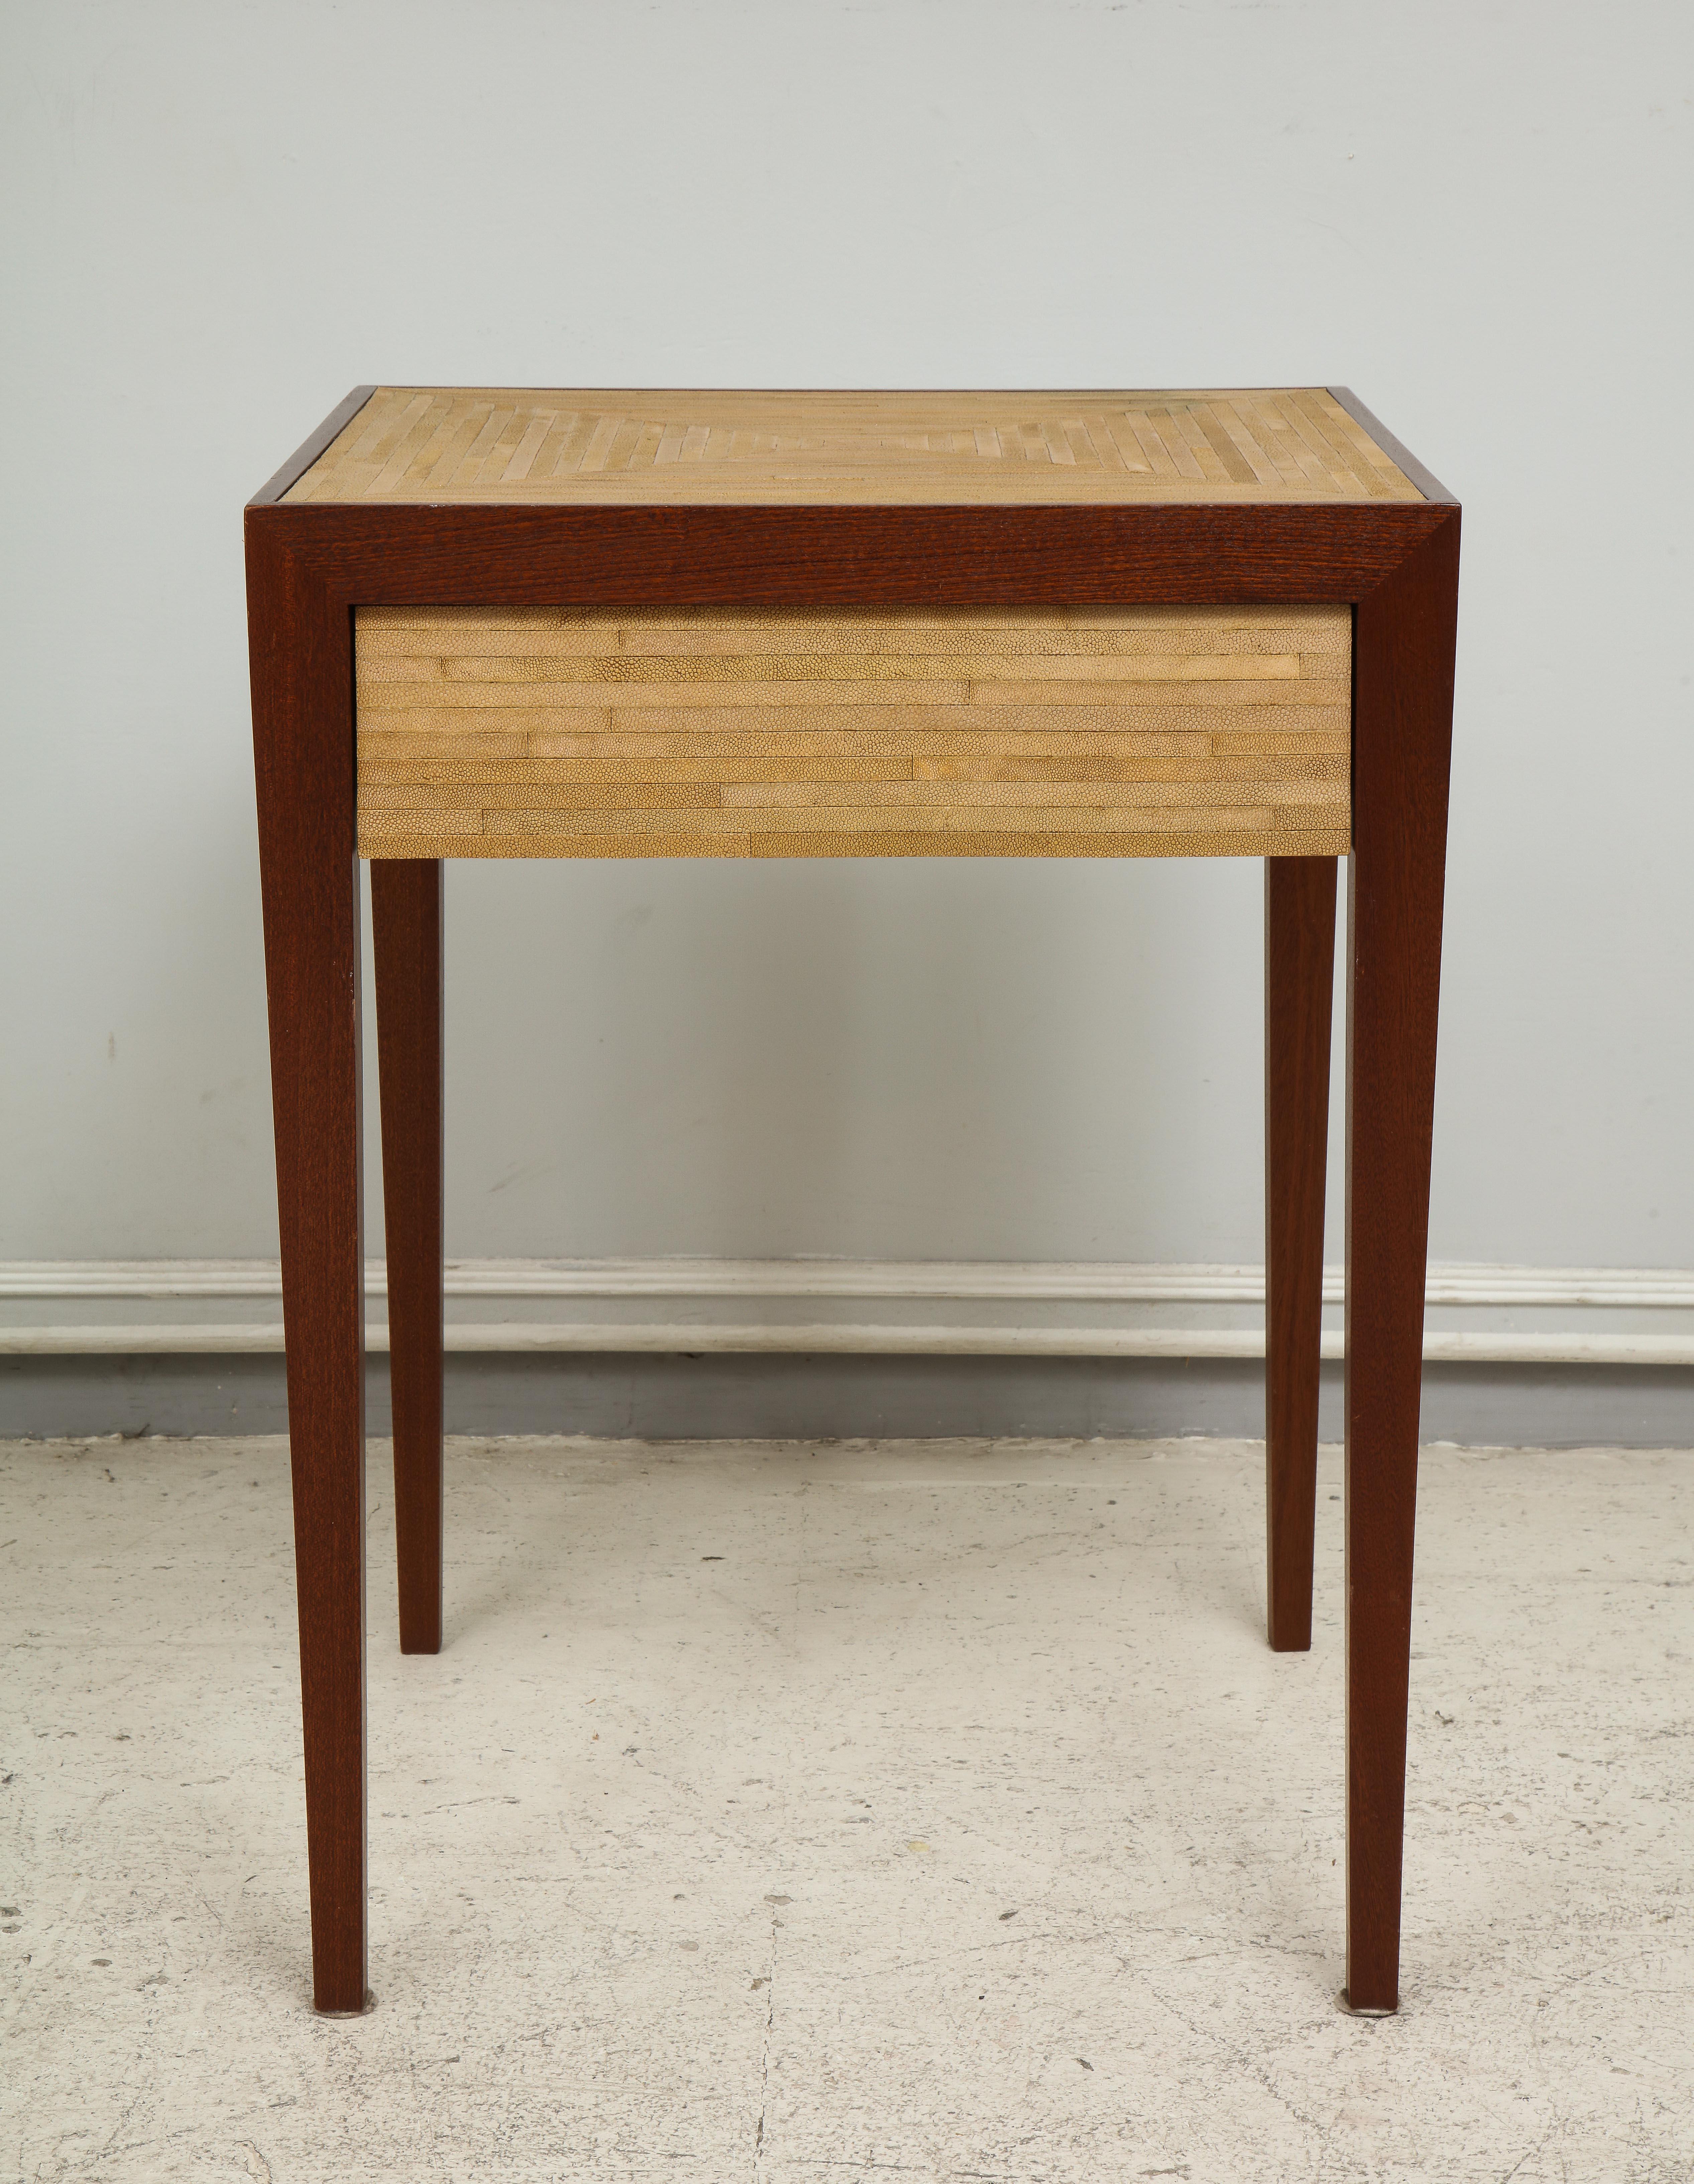 Stained Custom Shagreen-Top Tables with Central Drawer in the Jean-Michel Frank Manner